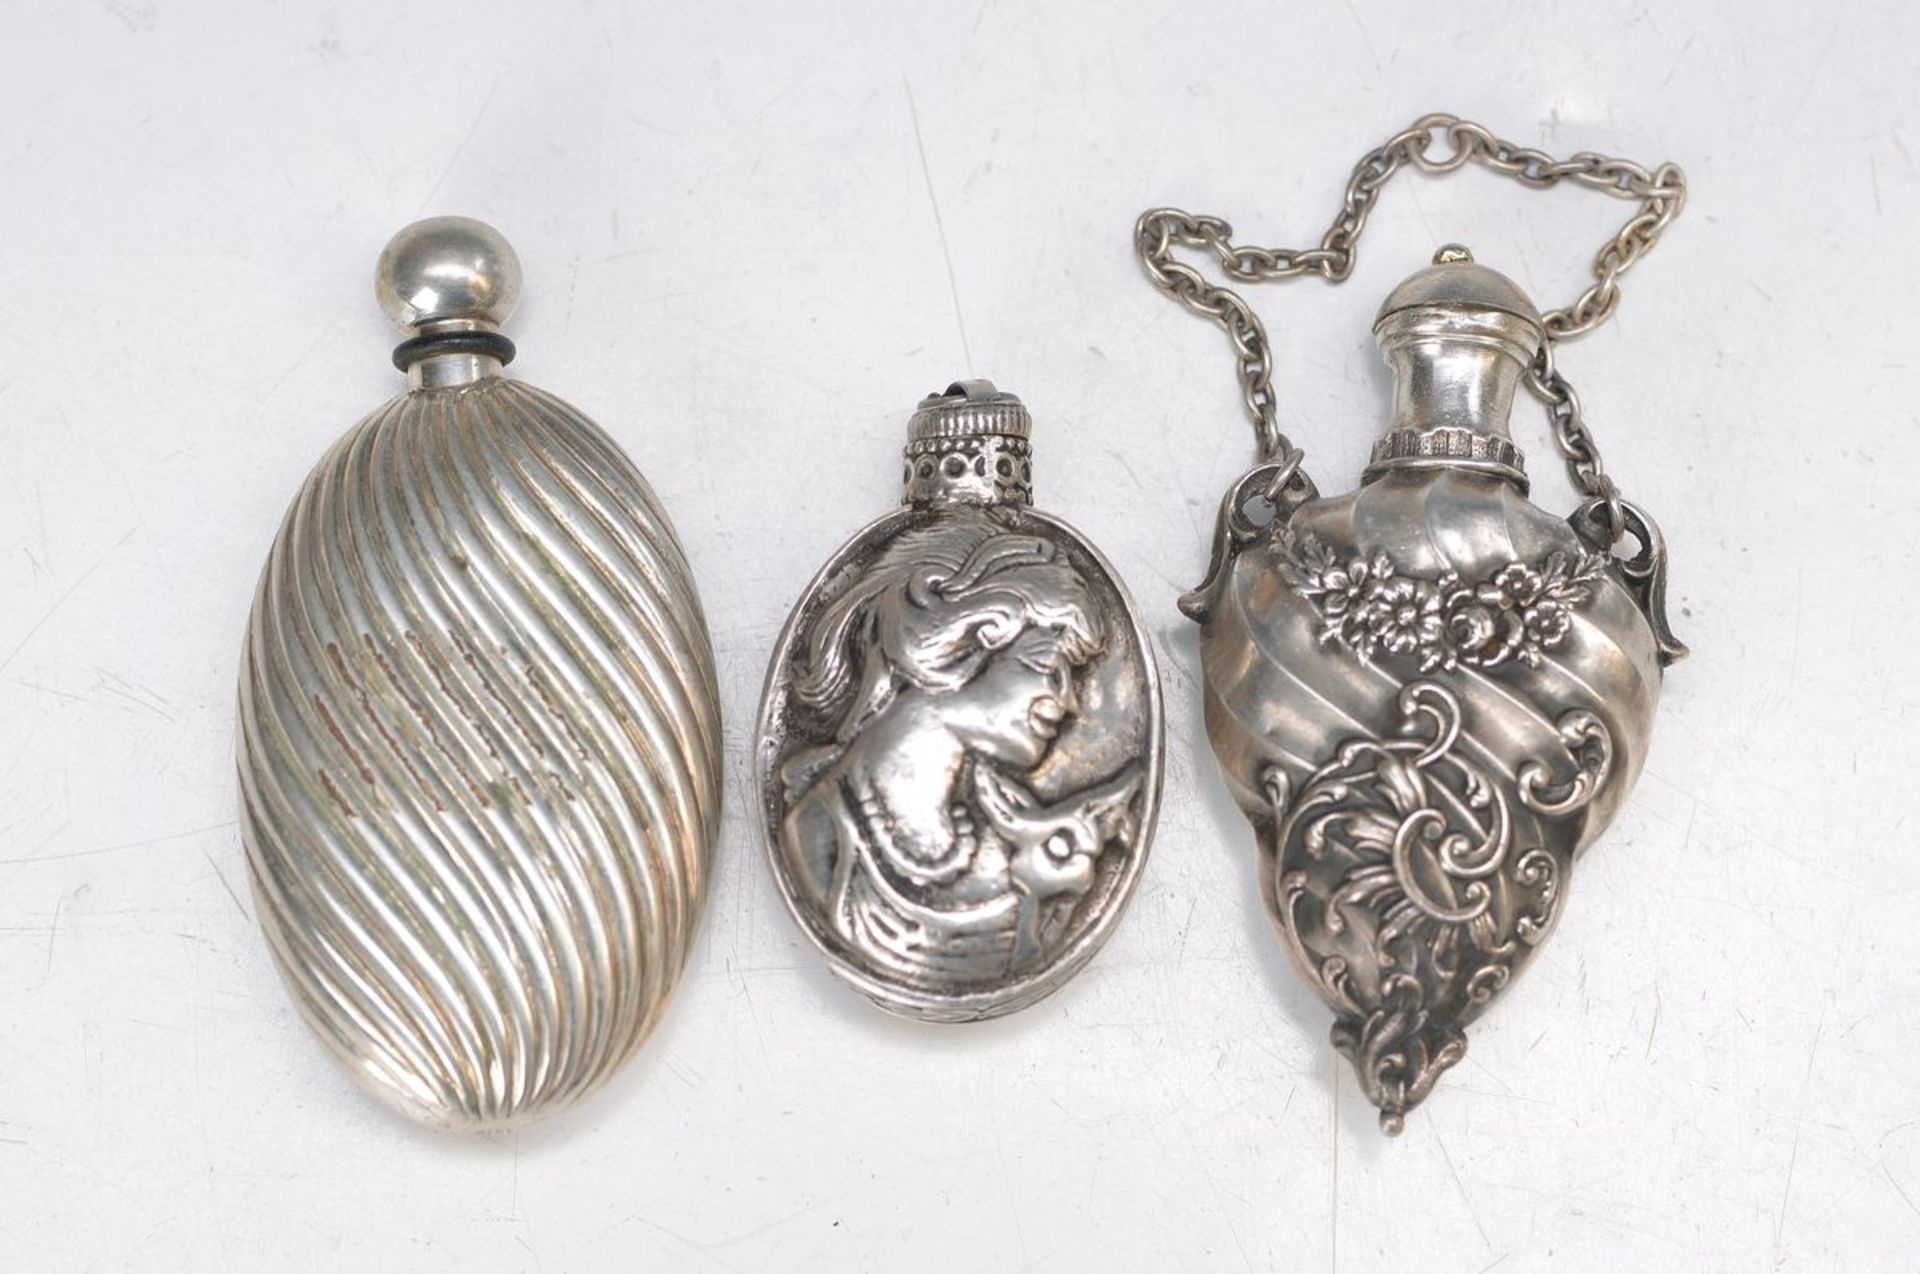 3 snuff bottles, around 1900, silver, 1 of 925 Sterling silver with Rococo decor, 6cm; 1 with